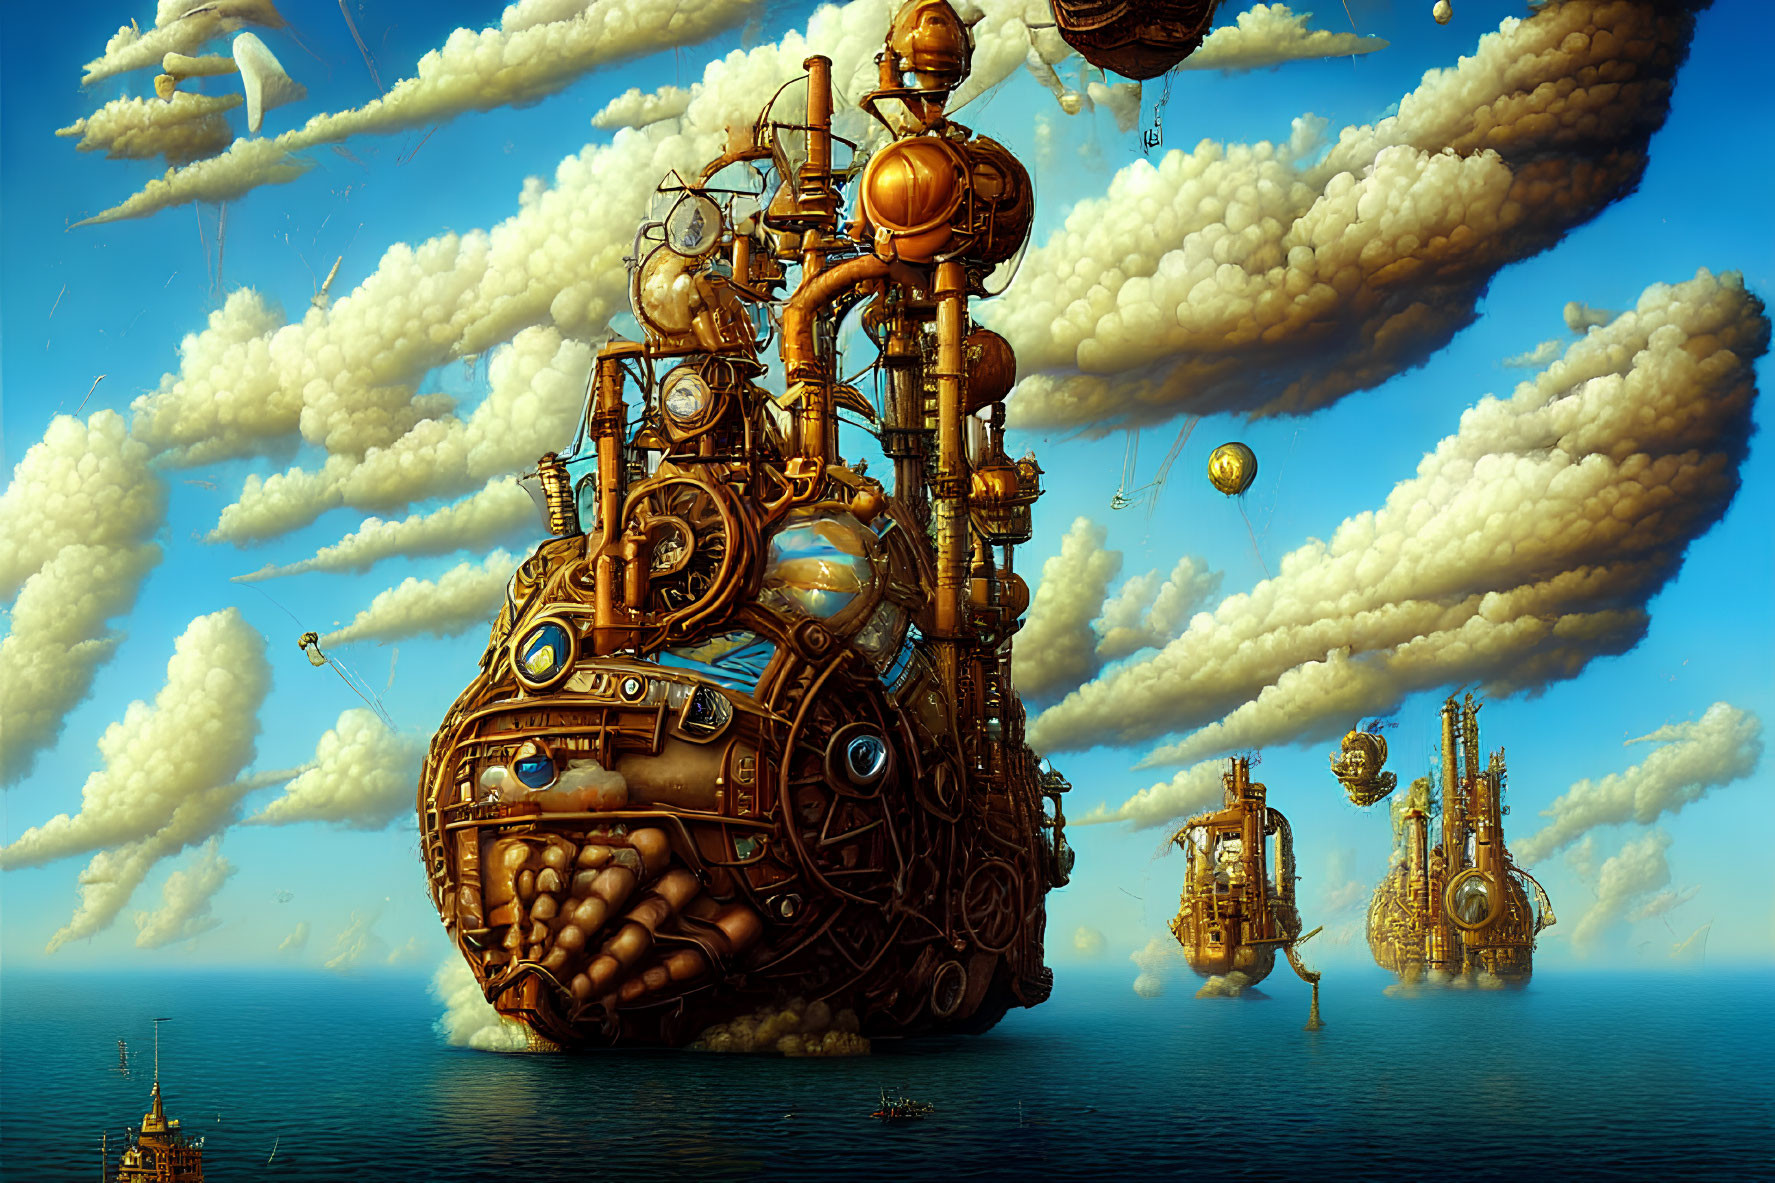 Steampunk-inspired floating city with metallic structures and airships in blue sky